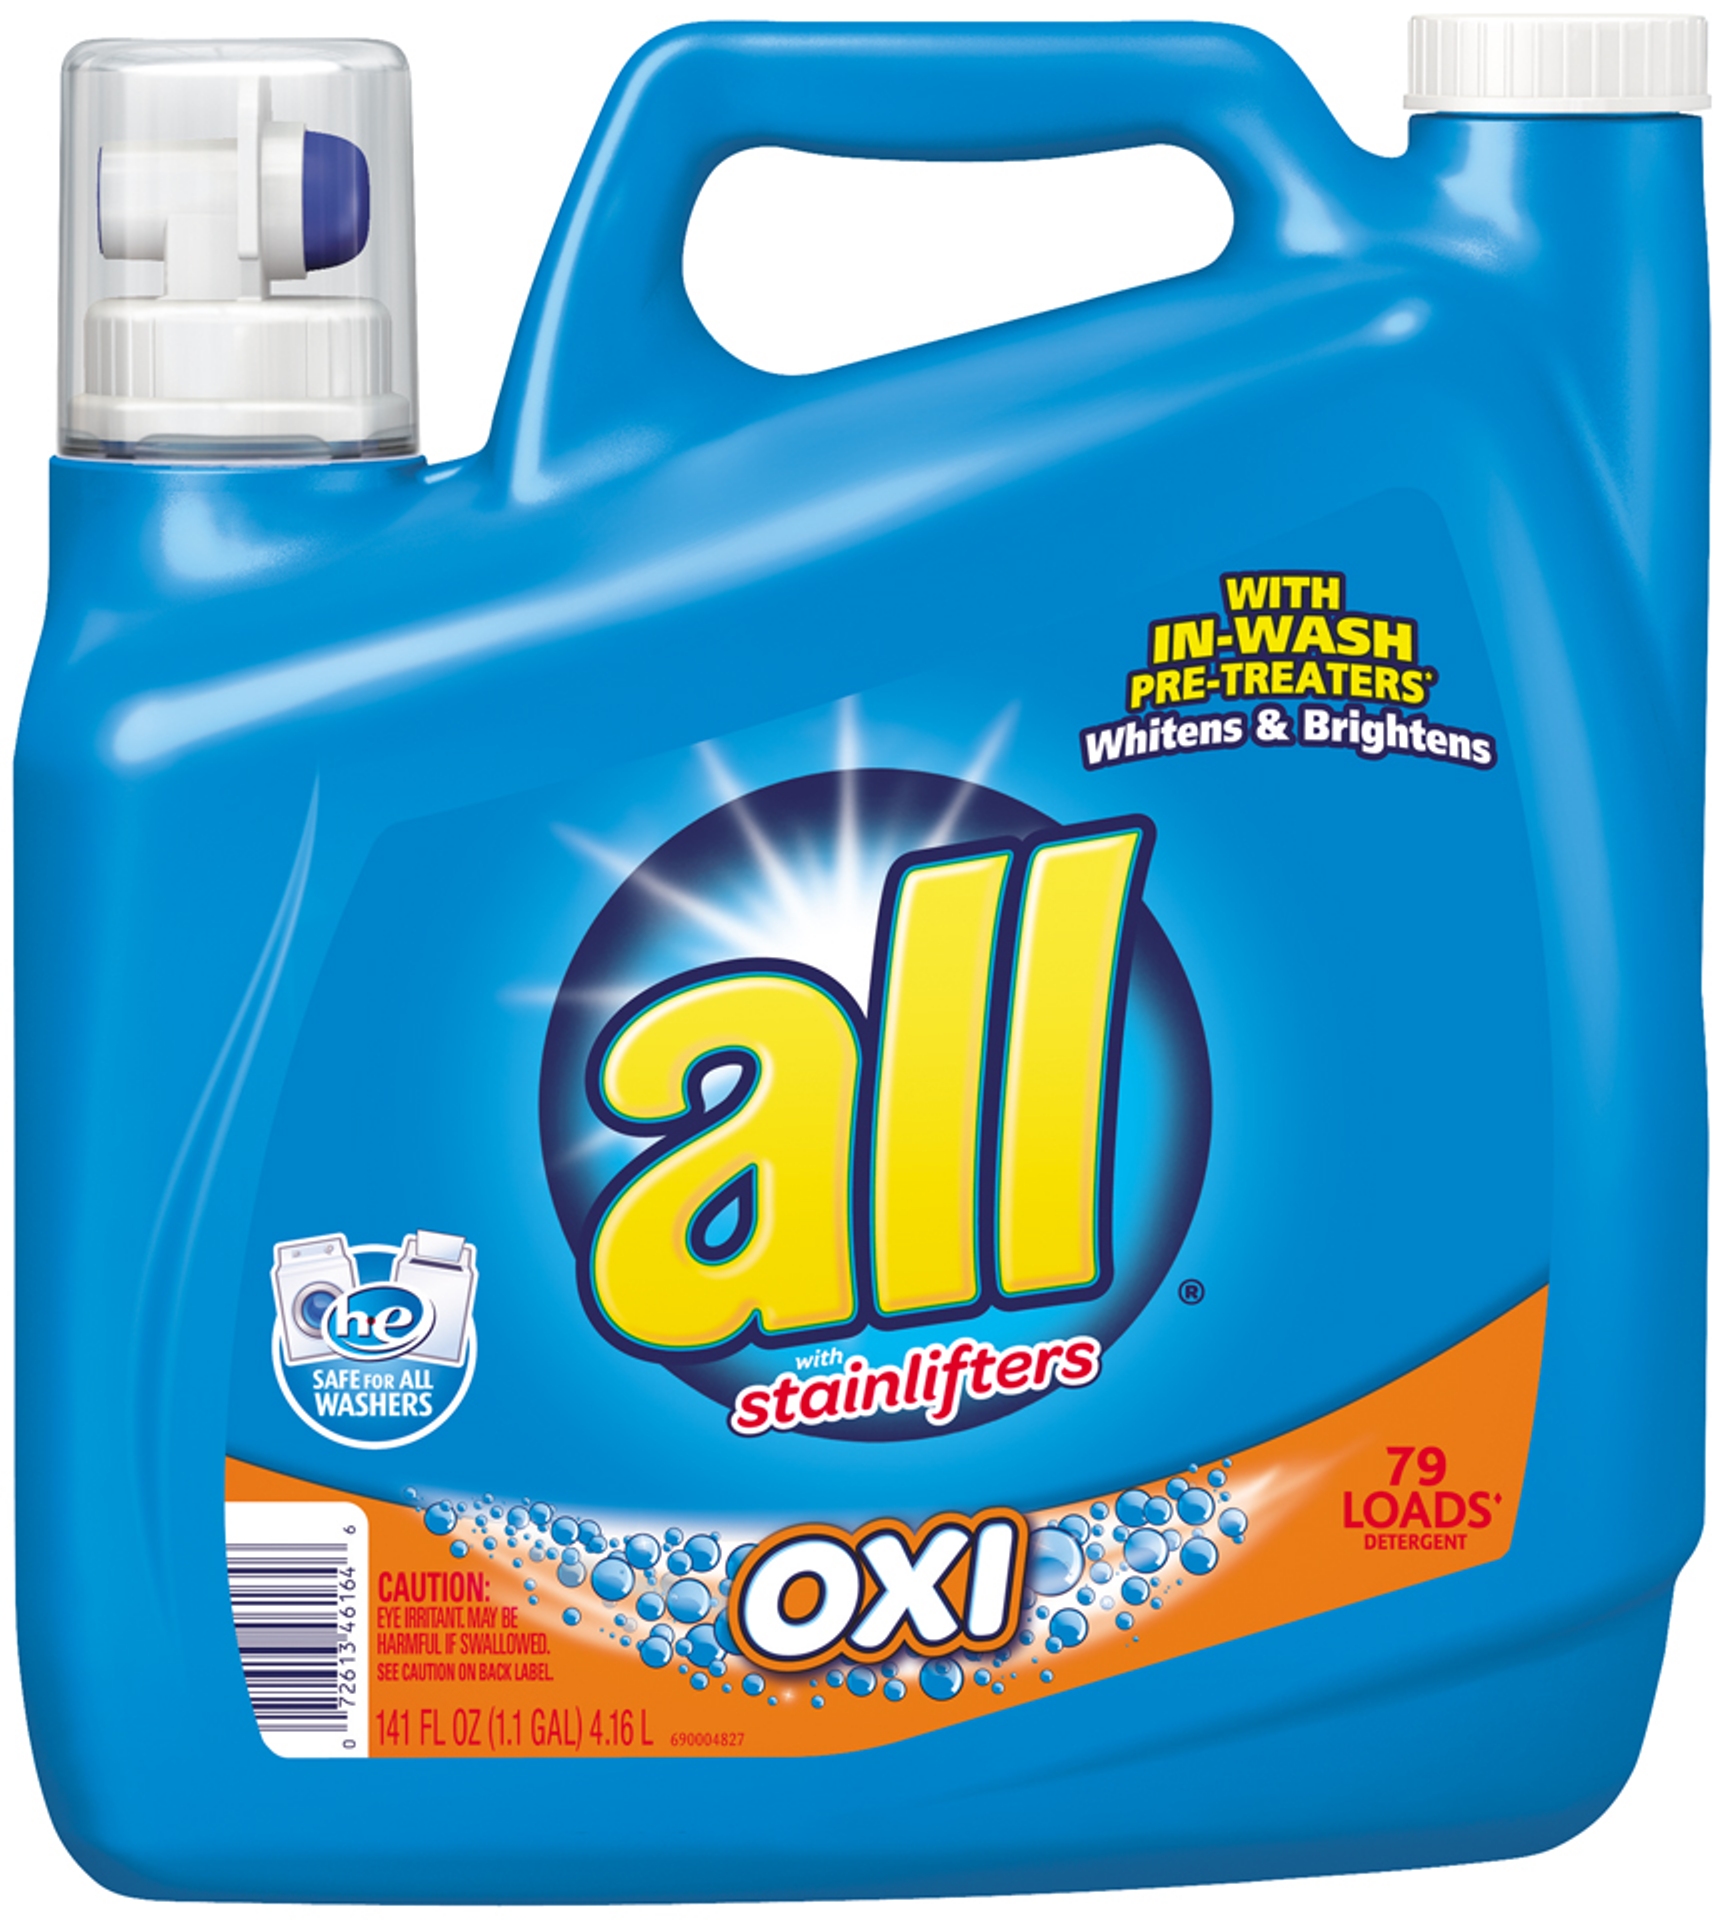 UPC 072613461646 product image for SUN PRODUCTS CORPORATION With Stainlifters Oxi 79 Loads Laundry Detergent | upcitemdb.com